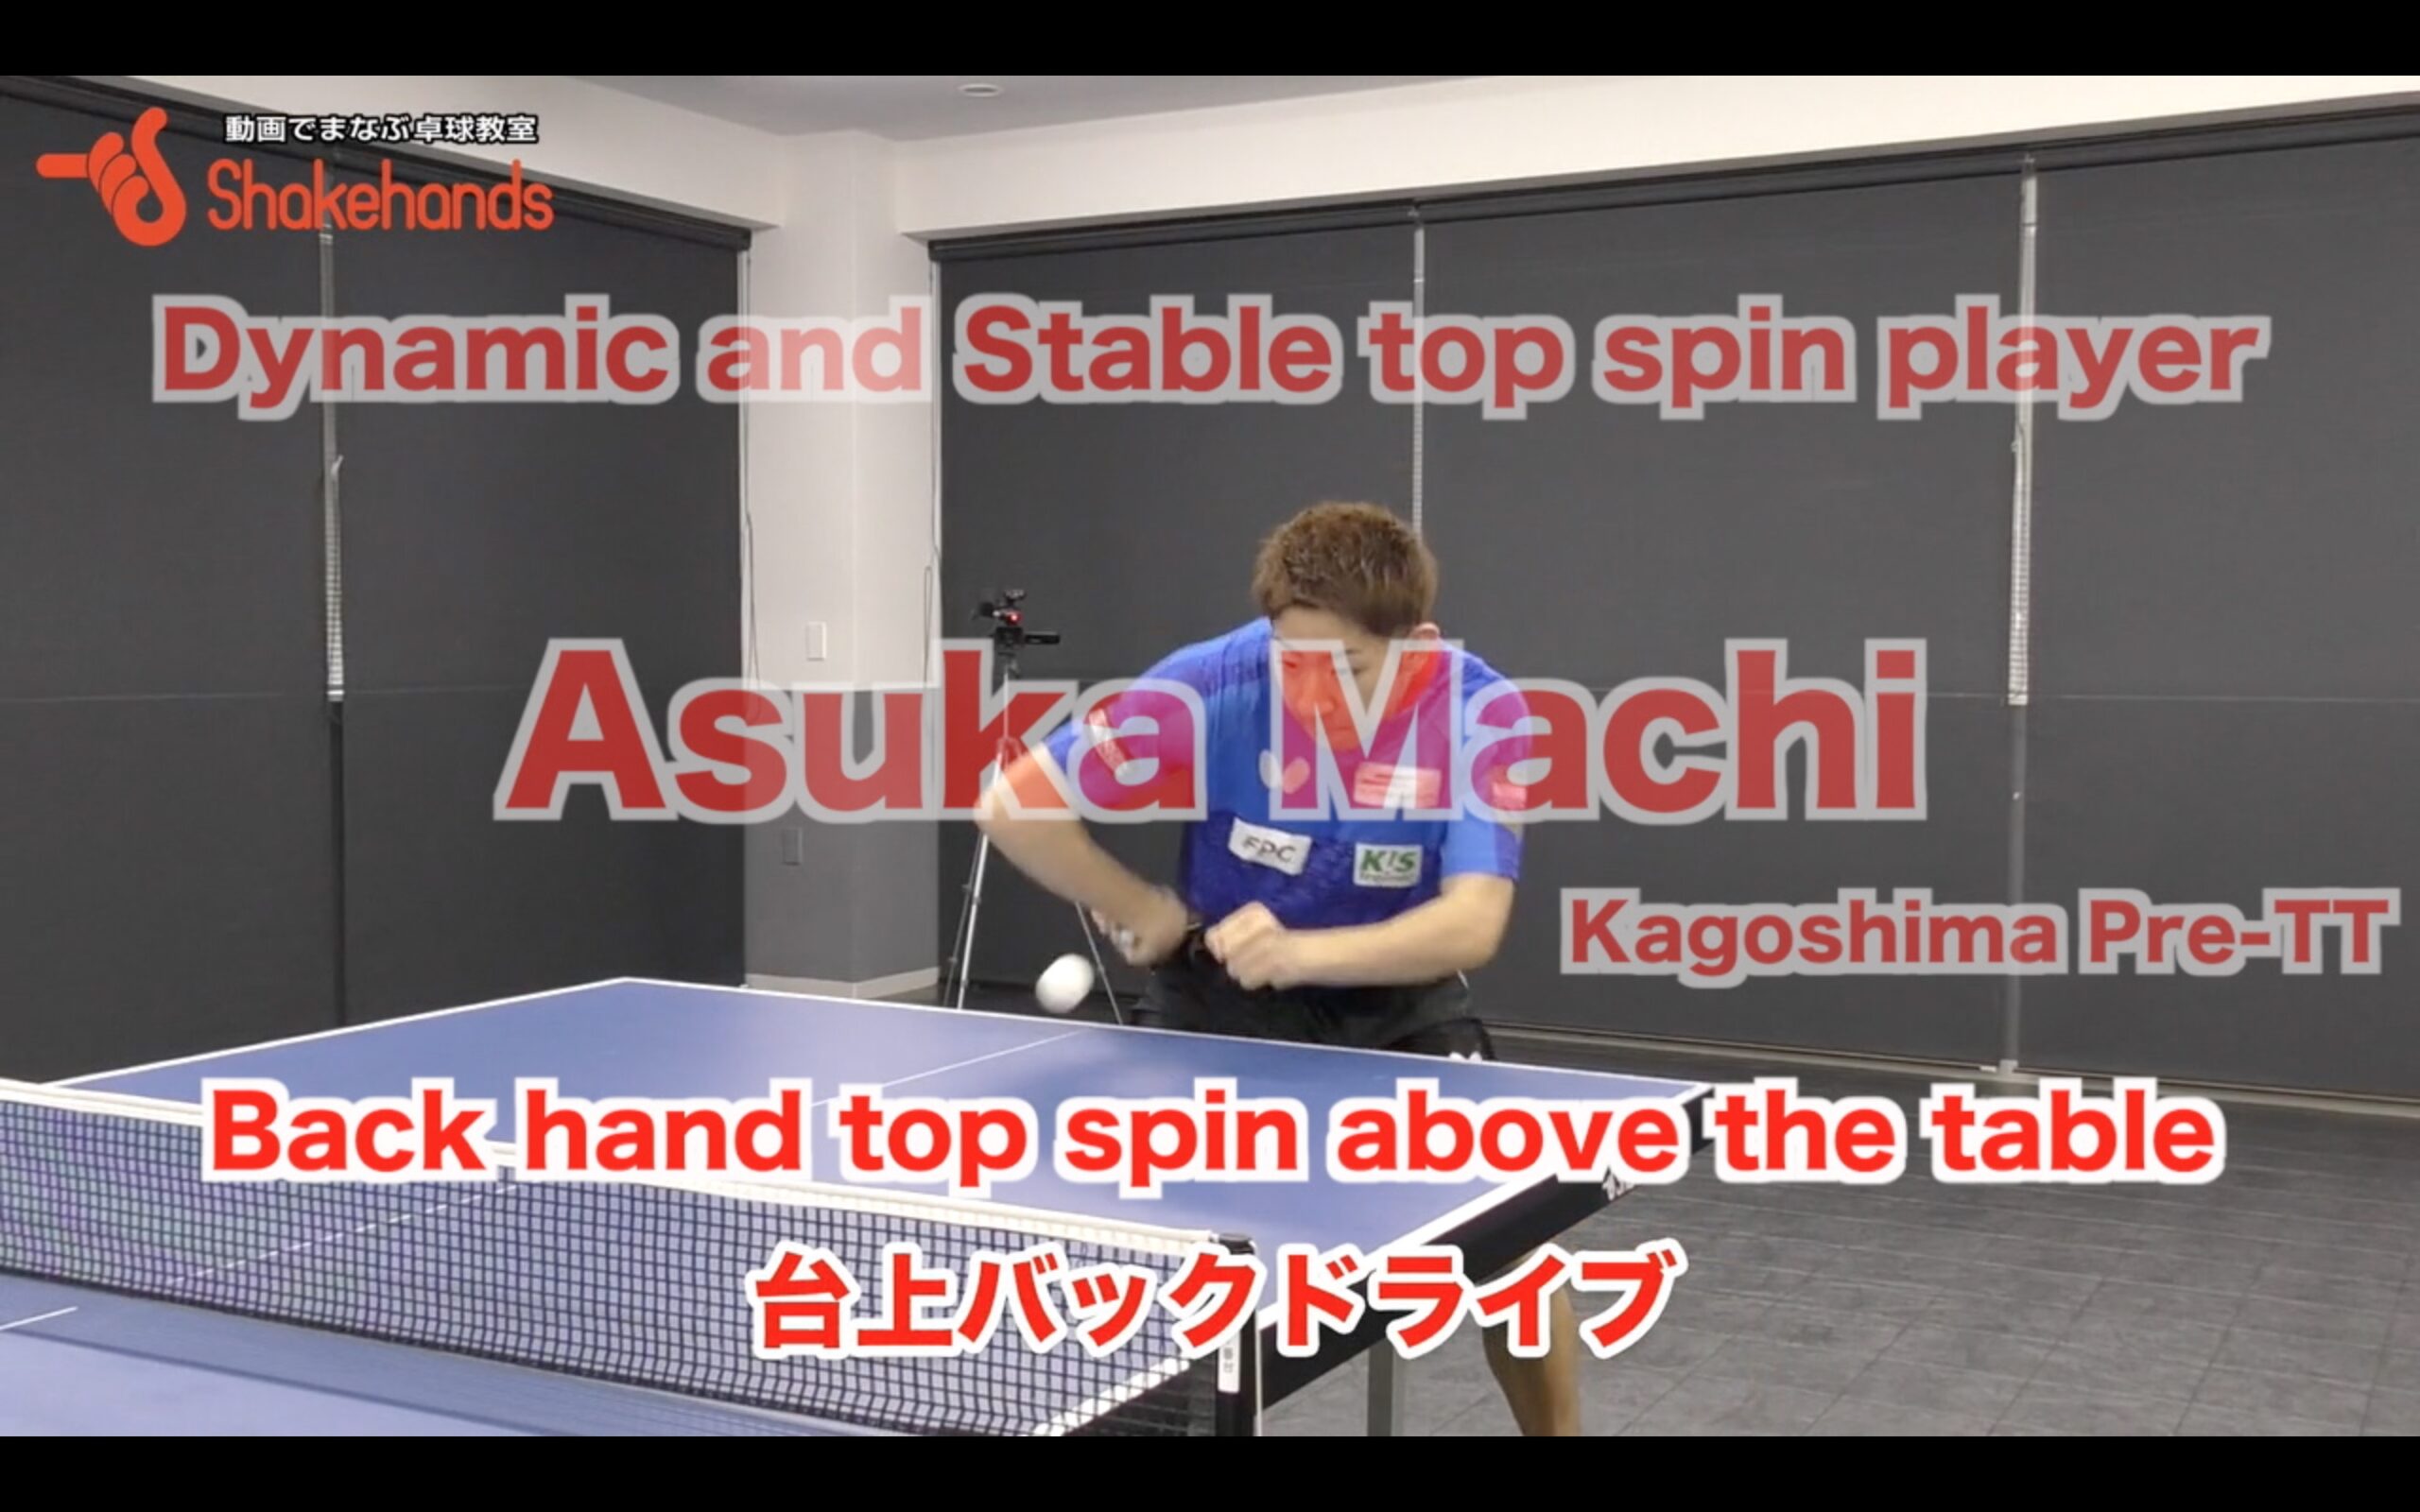 Back hand top spin above the table